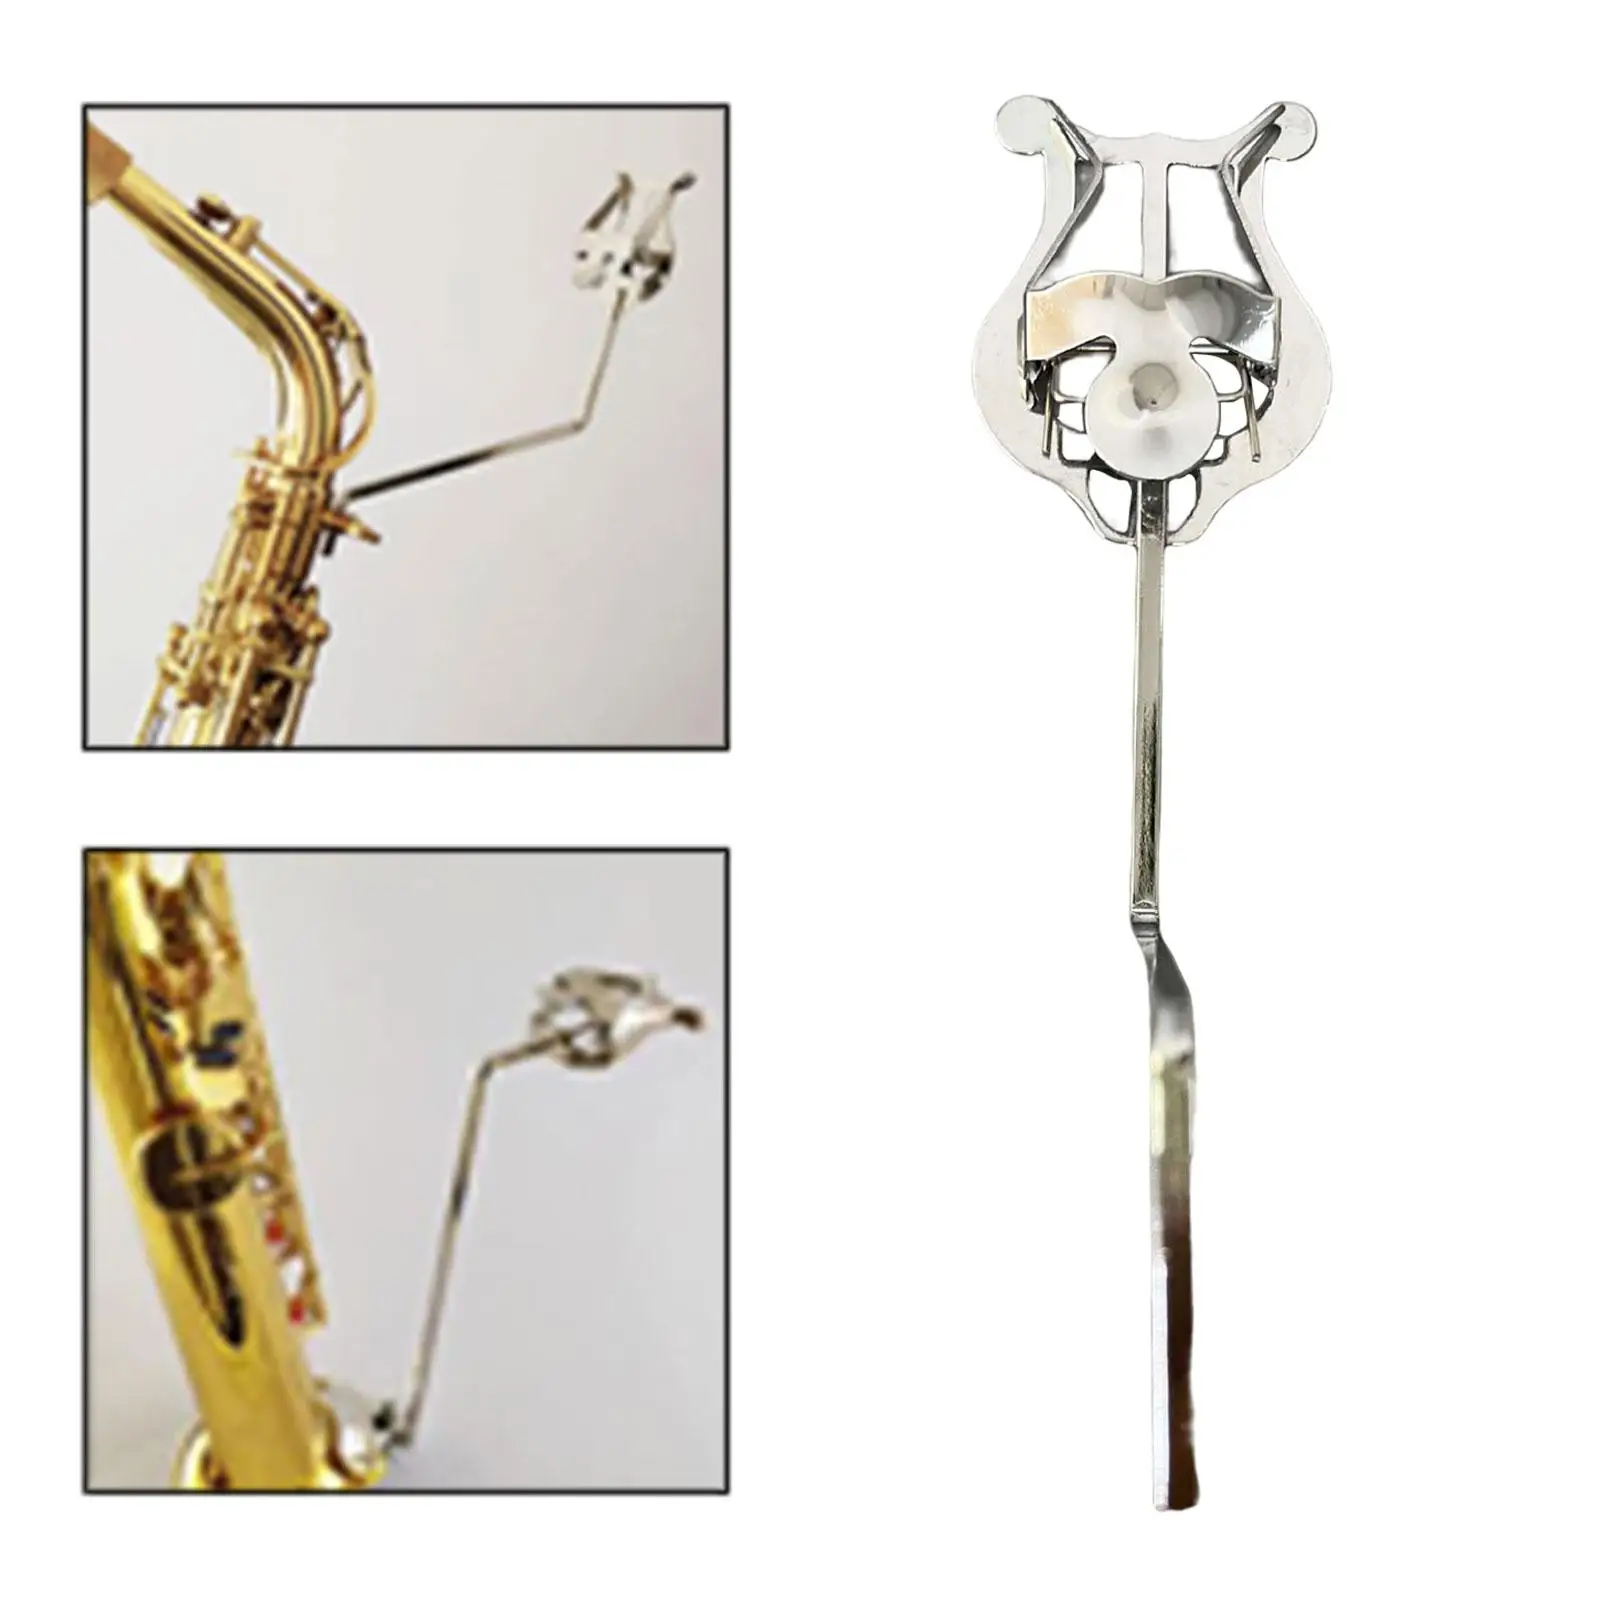 Portable Clarinet Marching Lyre Music Clip Trumpet Sheet Music Clip Metal Holder for Trumpet Saxophone Accessory Replacements